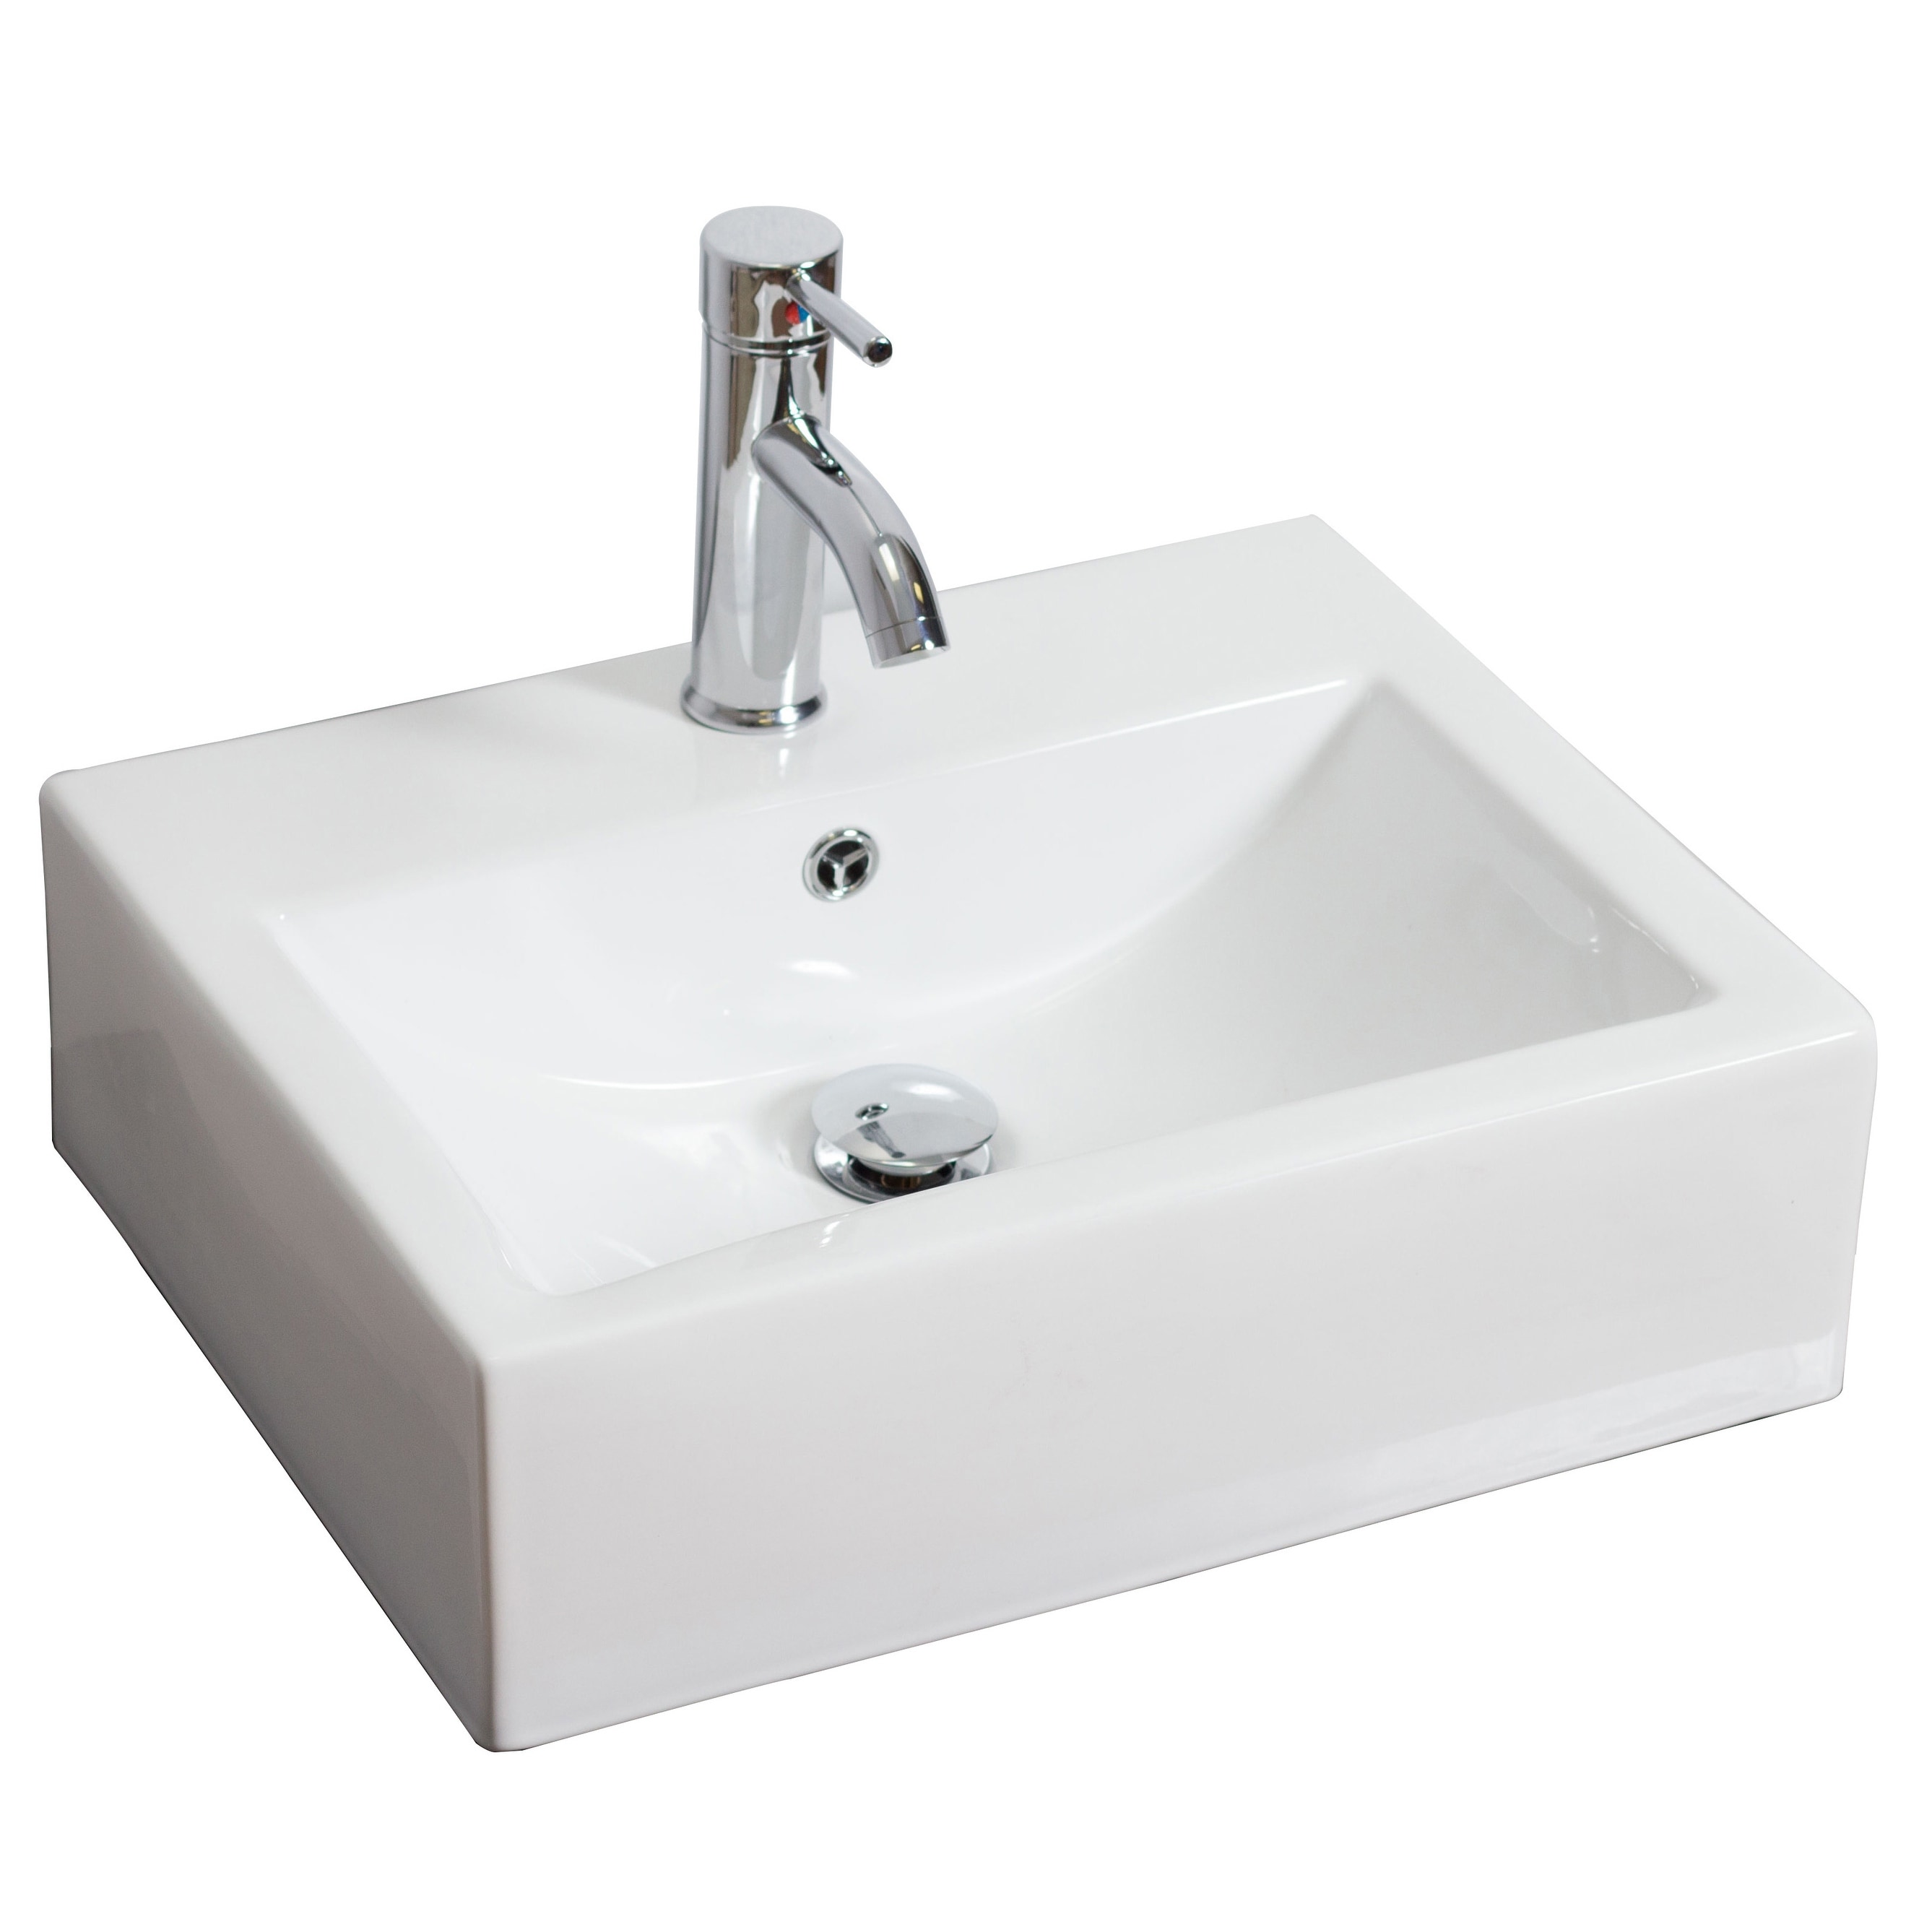 20.25-in. W Above Counter White Vessel Set For 1 Hole Center Faucet - Faucet Included